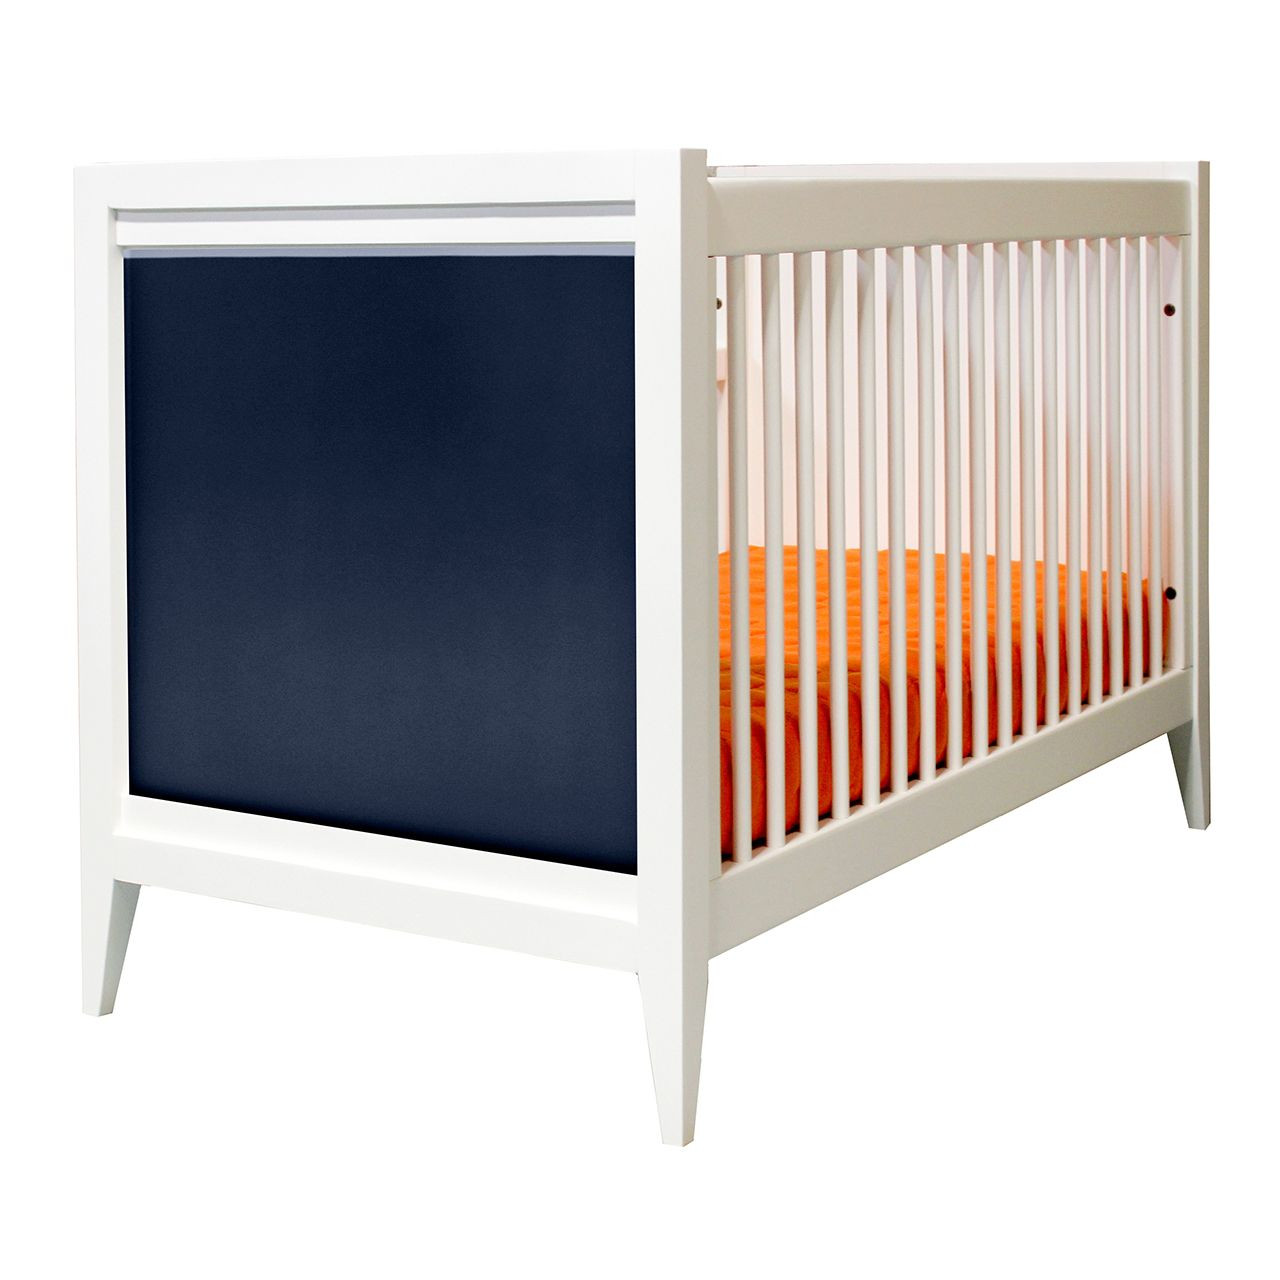 3 in 1 Baby Bed Guardrail Crib For 0-36months Infants Bed Barrier